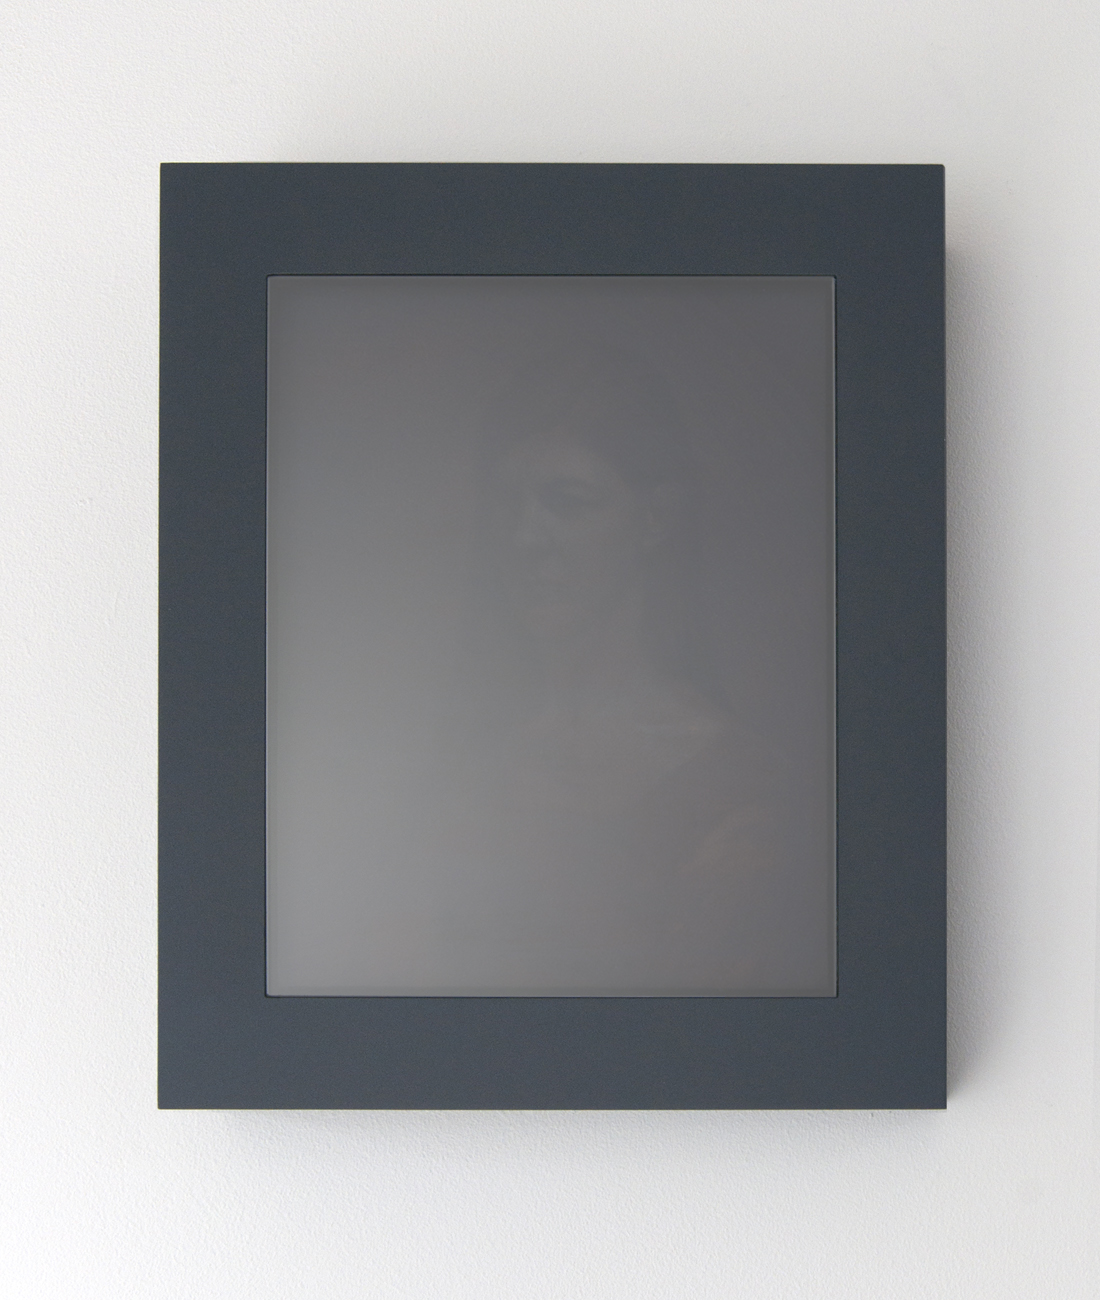 Mirrored 2019 oil on panel, glass and aluminium 12 3/4 x 14 3/4 inches / 32.7 x 37.8 cm